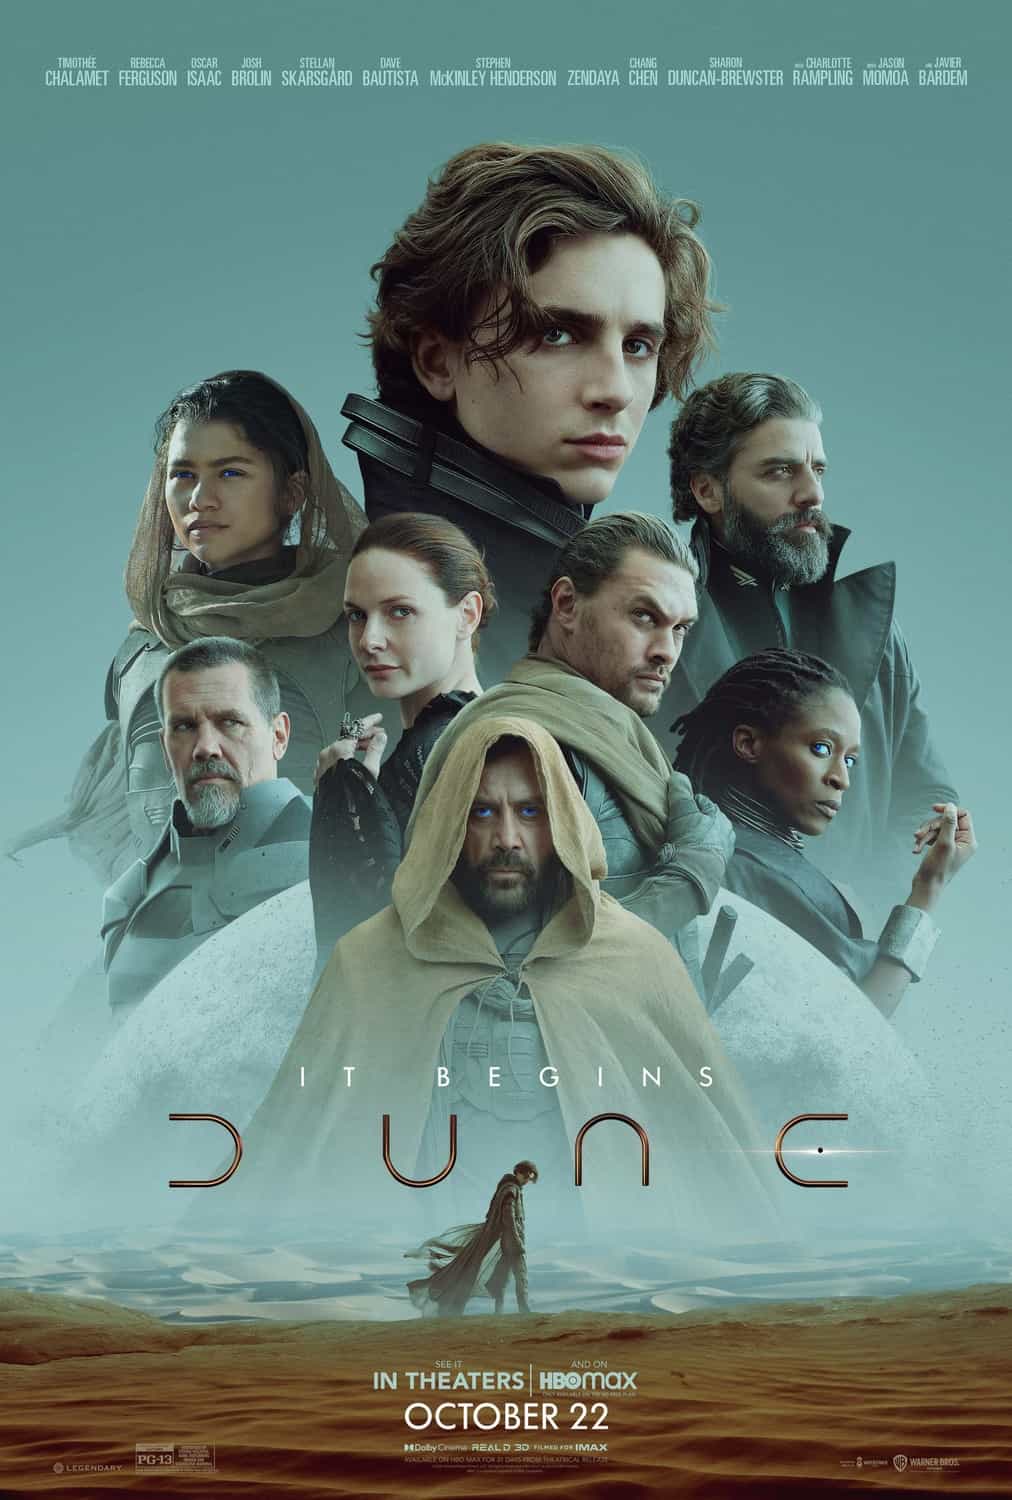 US Box Office Weekend Report 29th - 31st October 2021:  Dune stays at the top for a second weekend with My Hero Academia the top new movie